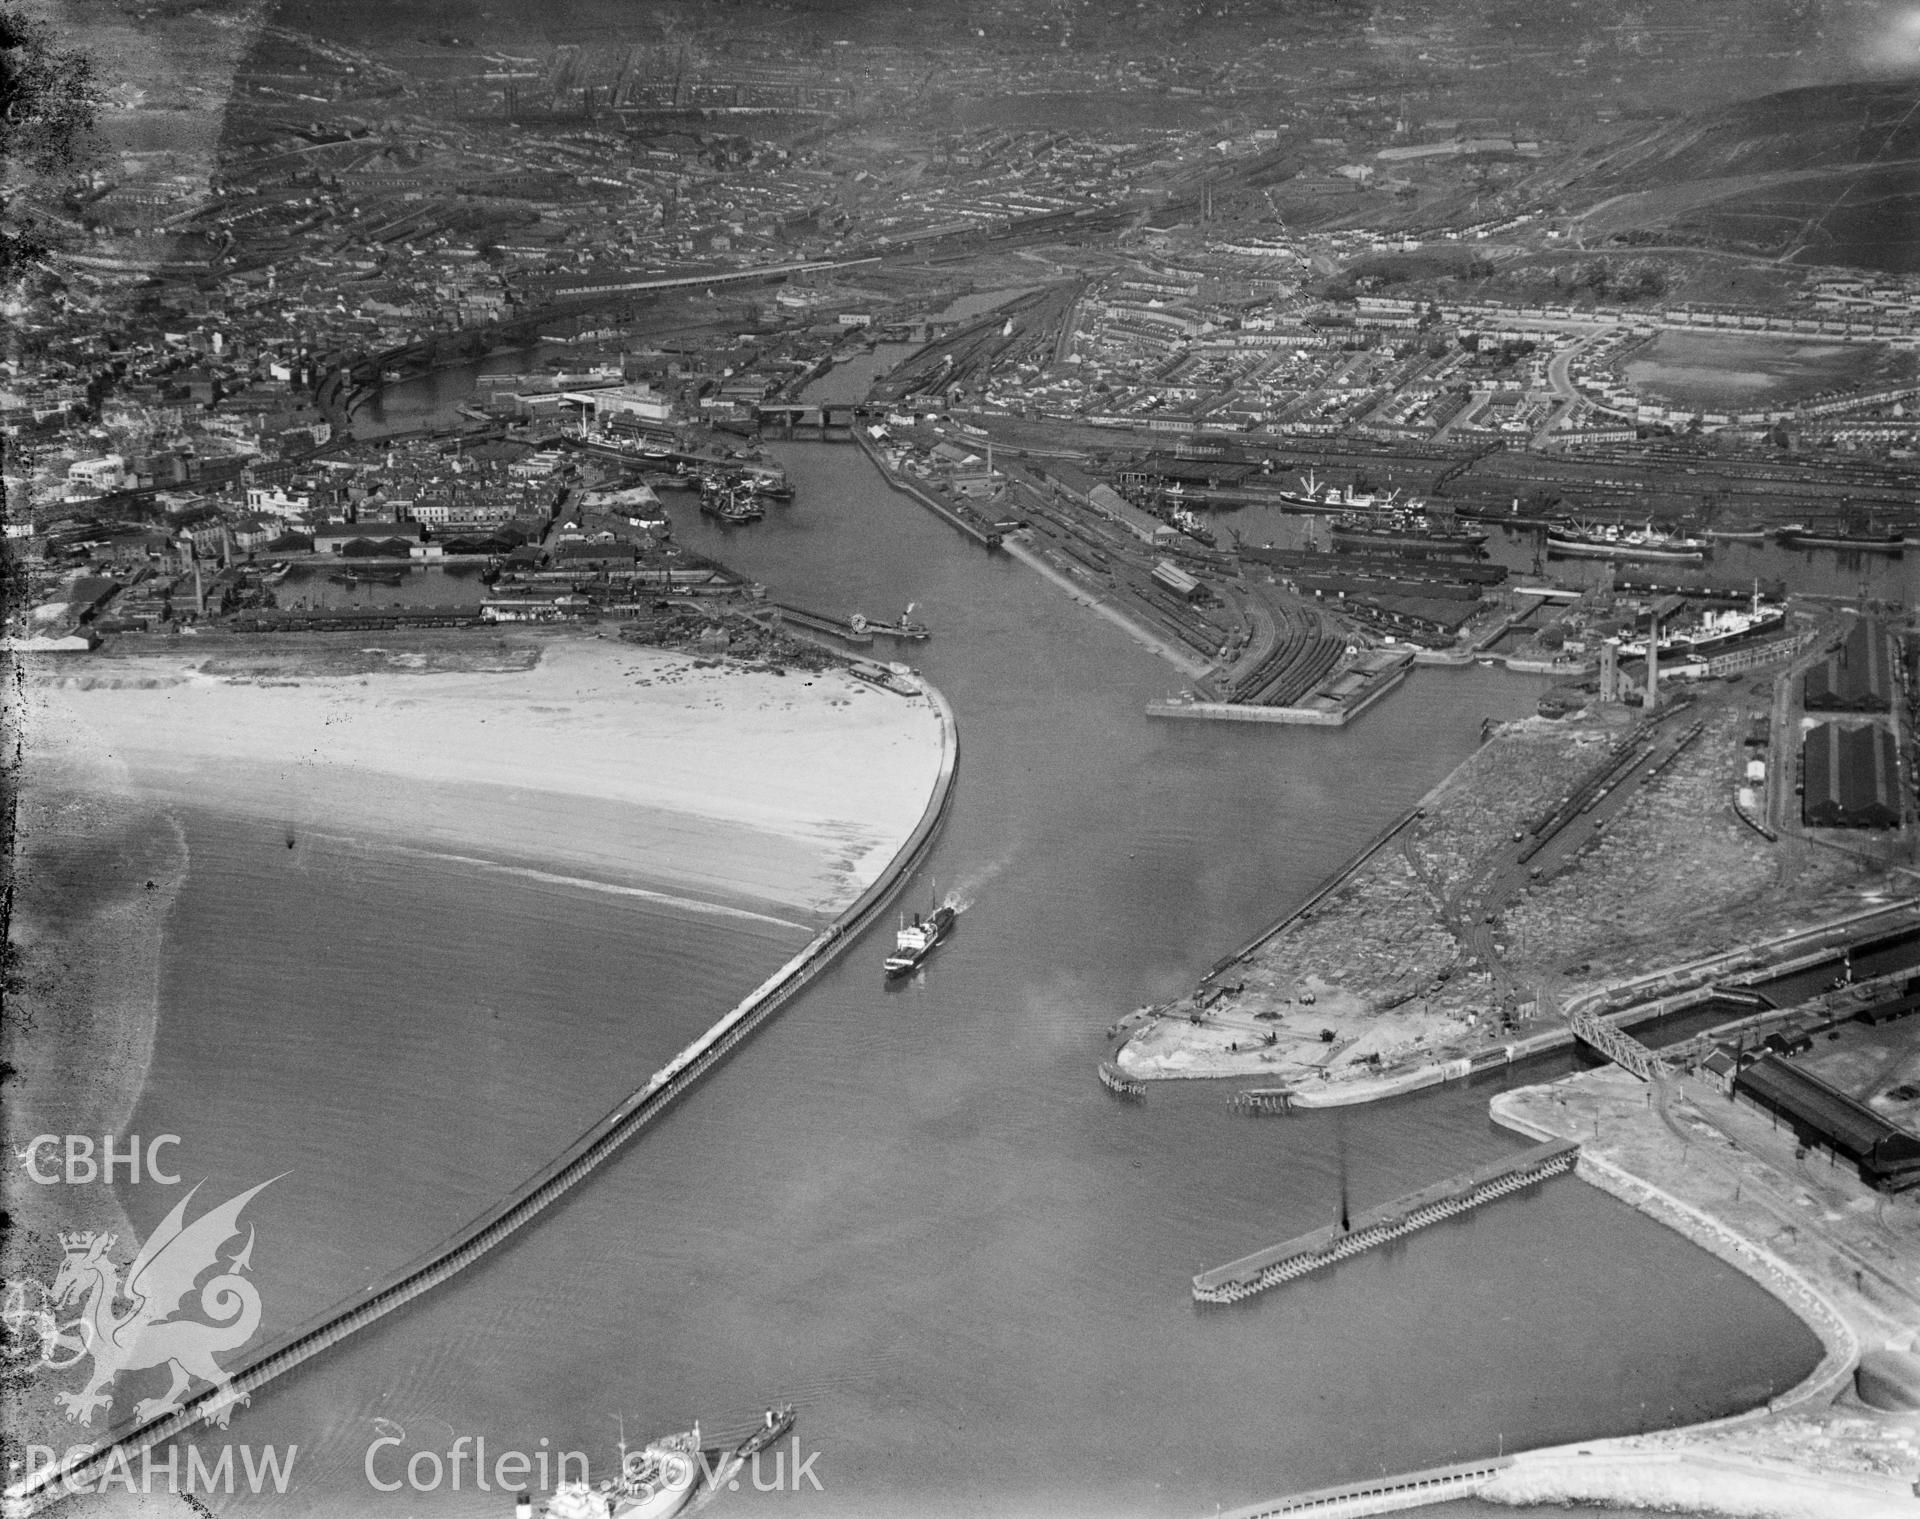 Black and white oblique aerial photograph showing Swansea Docks, from Aerofilms album Swansea (W30), taken by Aerofilms Ltd and dated 1929.